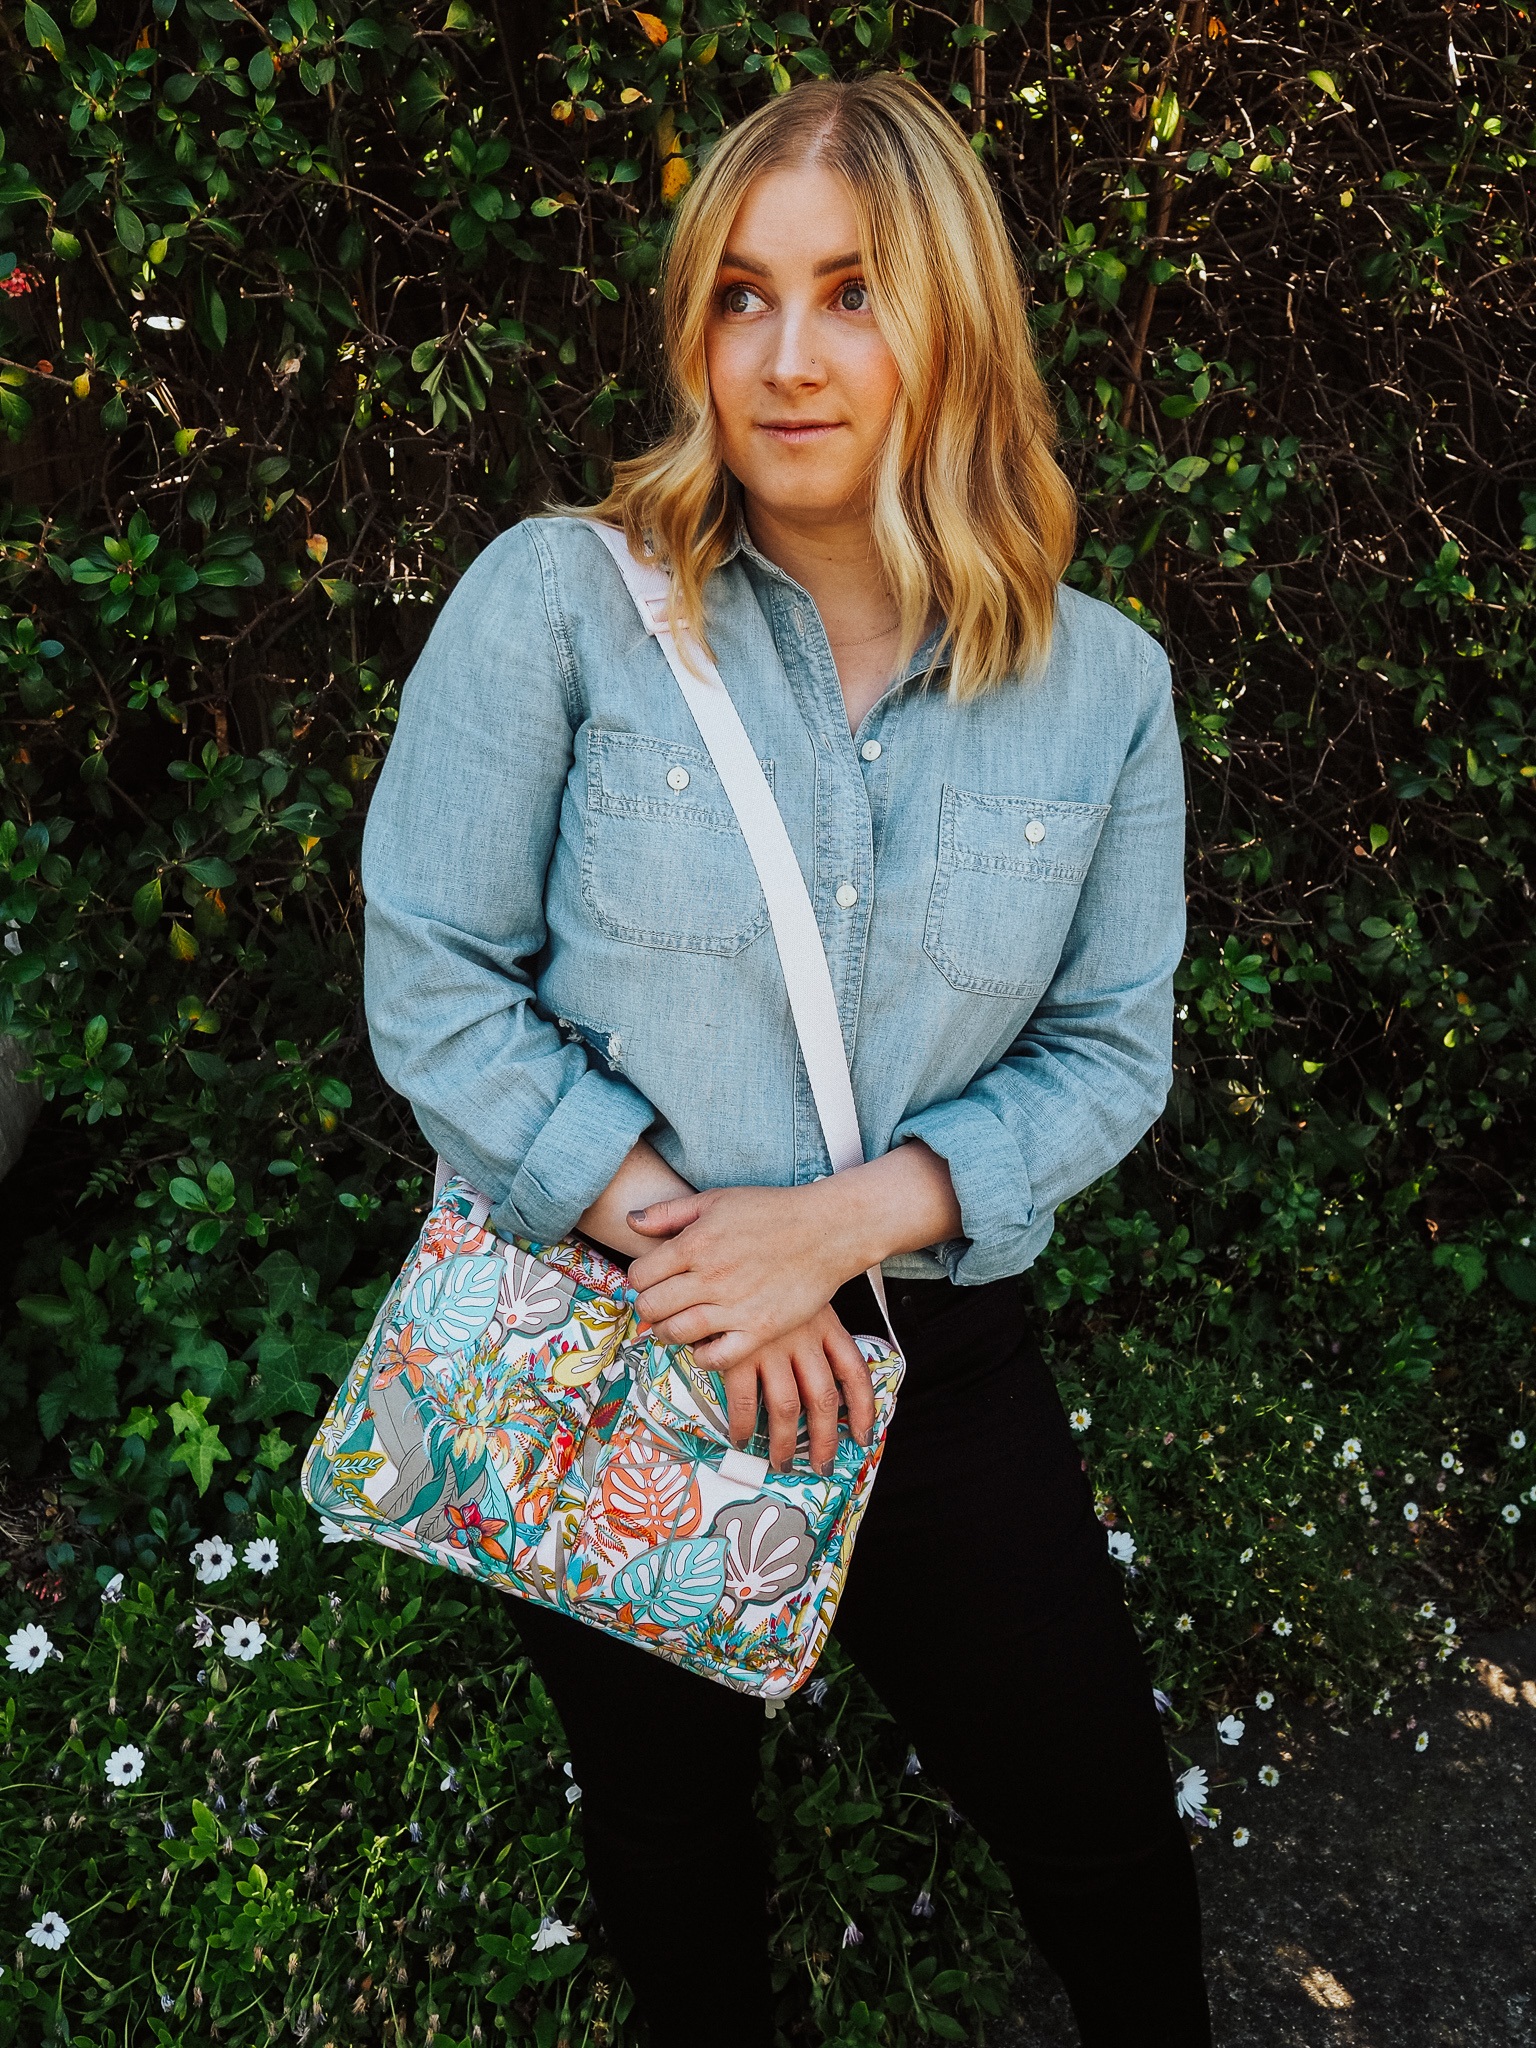 Affordable eco friendly bags can be tough to find! Vera Bradley's new Cotton ReIMAGINED line is packed with eco friendly bags at great prices.